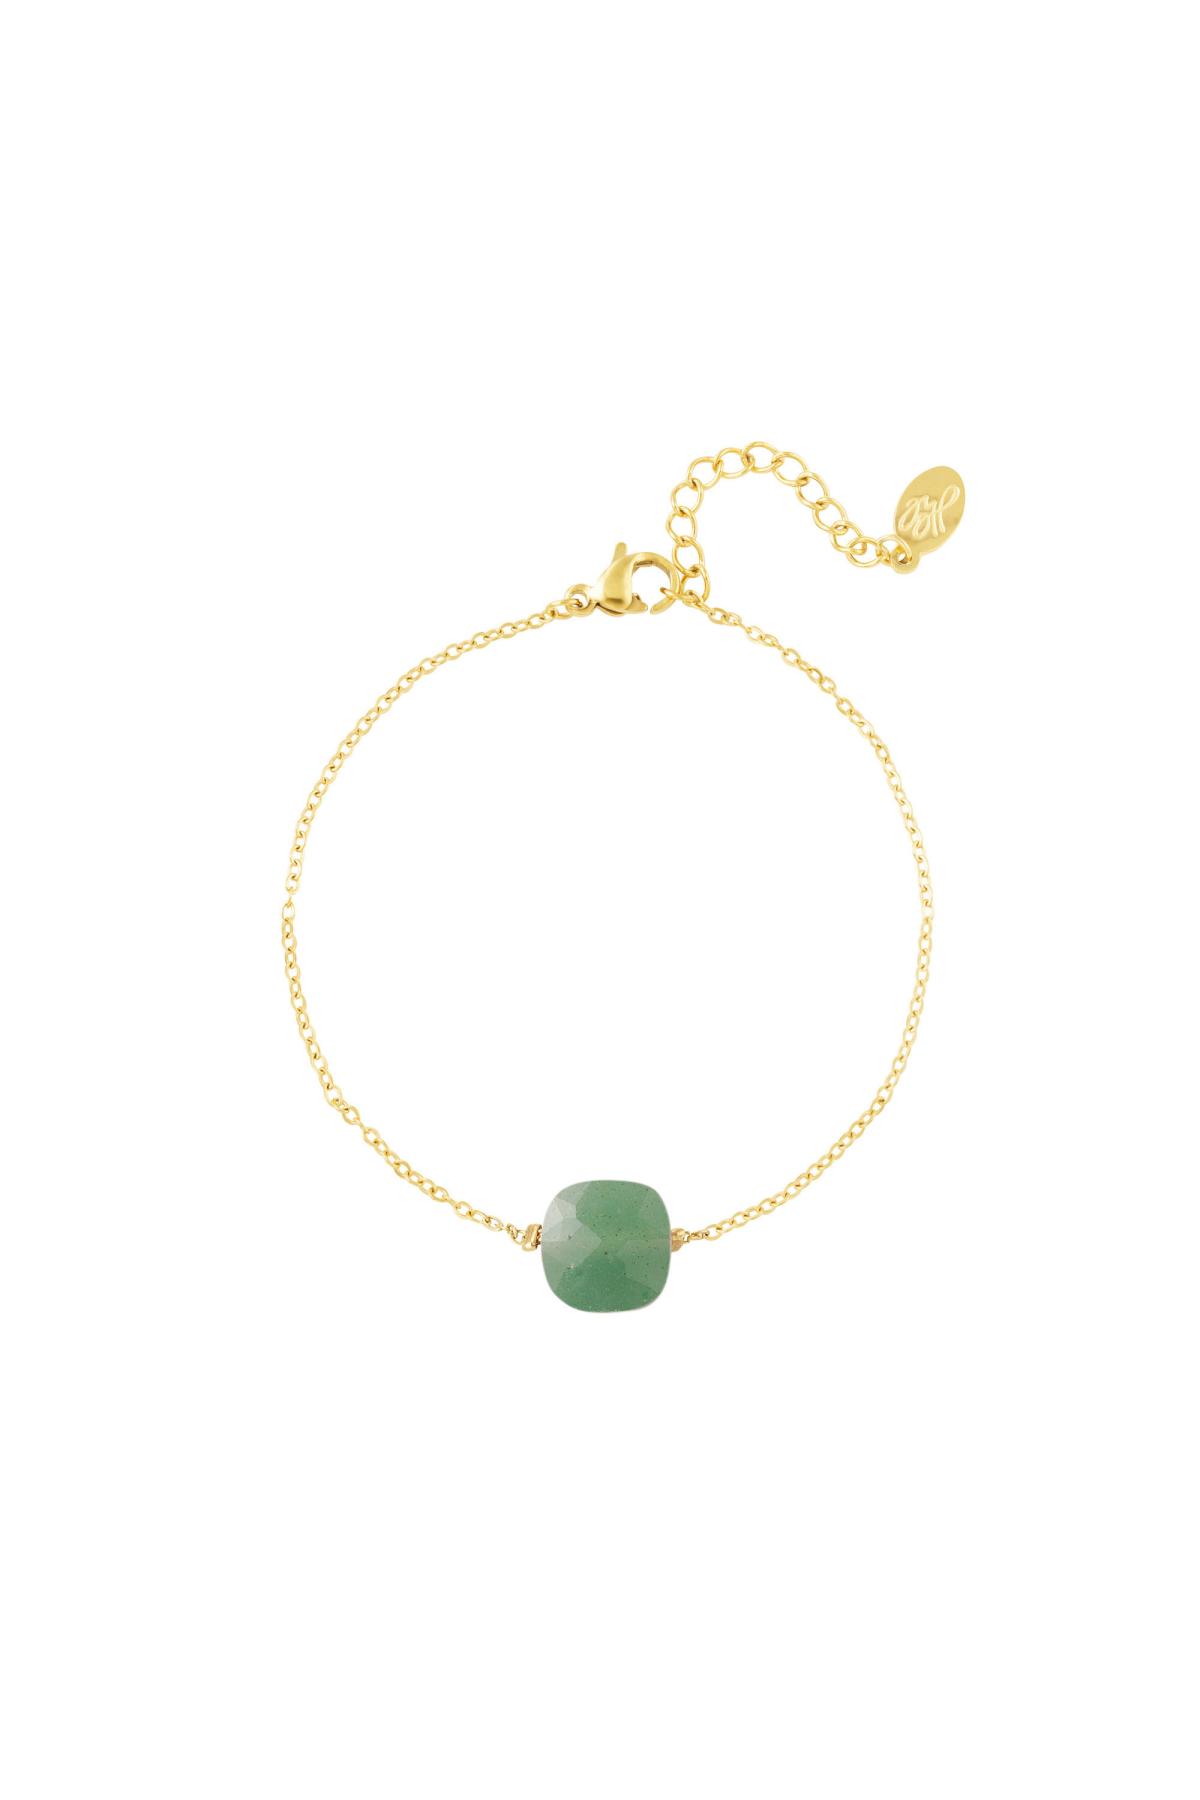 Bracelet with stone - Natural stones collection Green & Gold Stainless Steel h5 